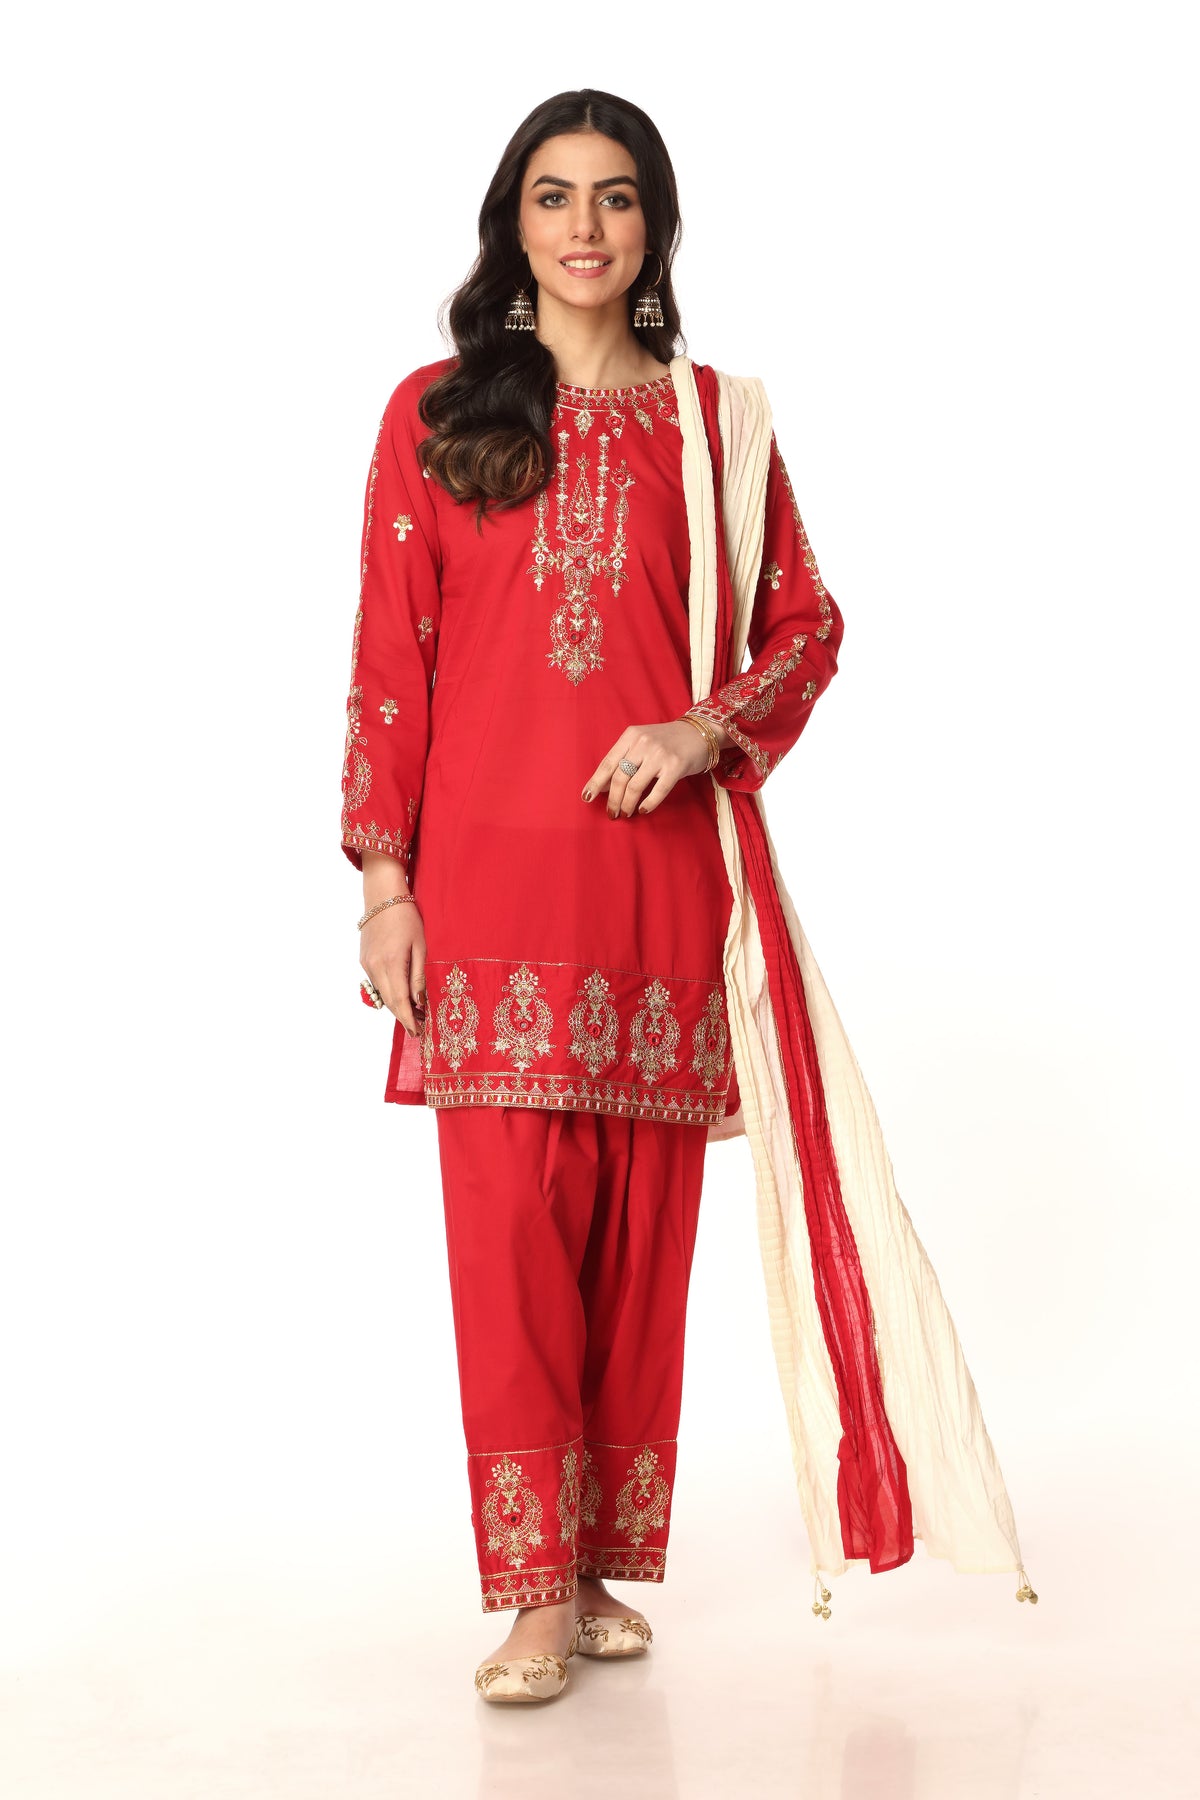 Red Booti in Red coloured Printed Lawn fabric